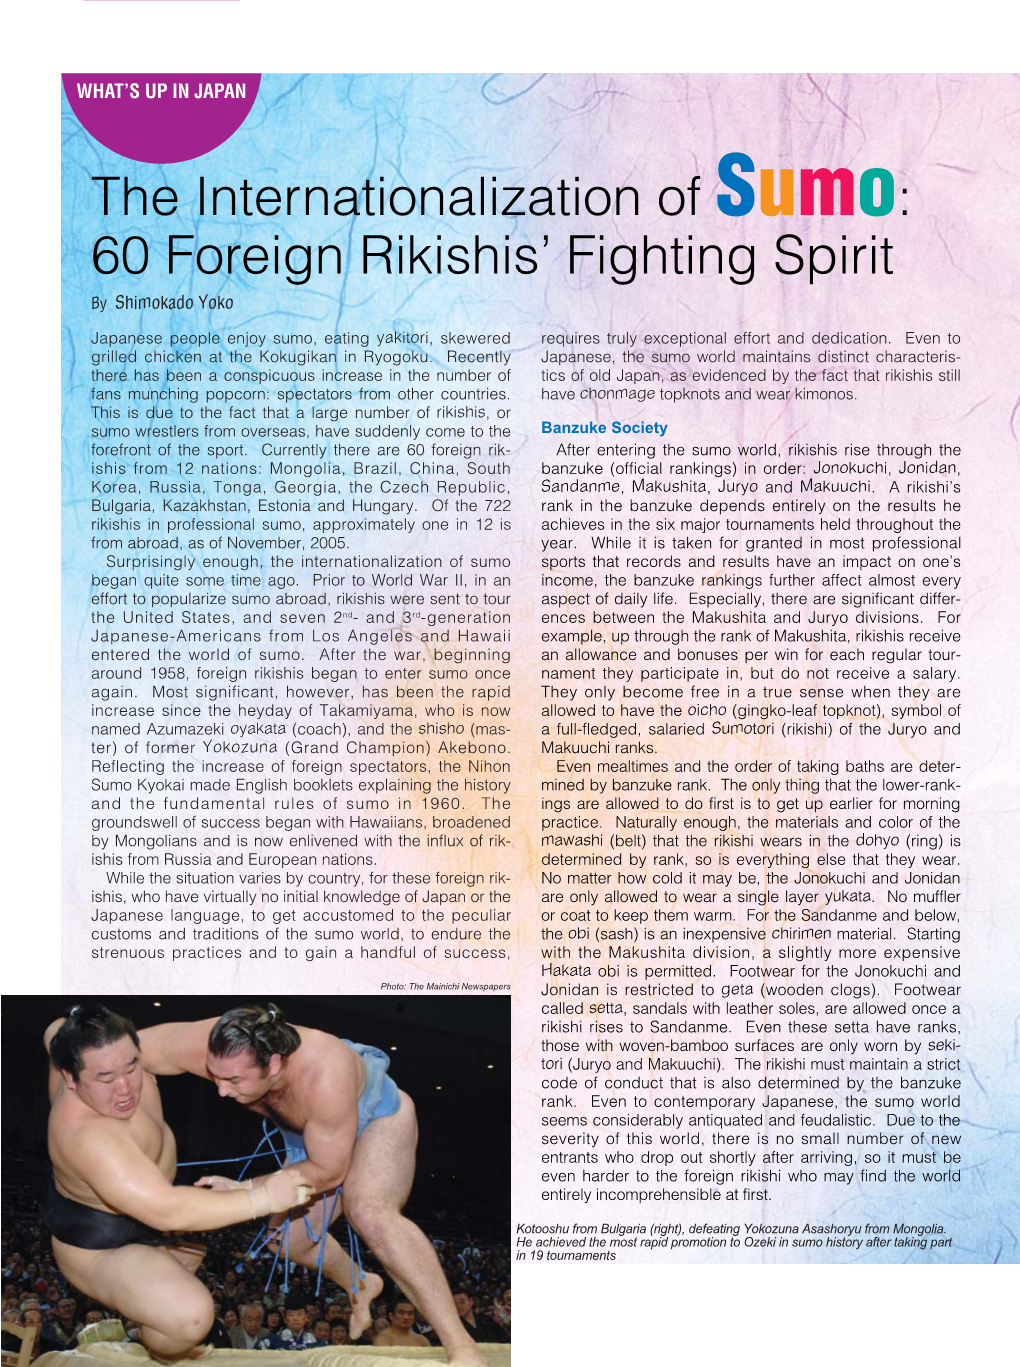 The Internationalization of Sumo: 60 Foreign Rikishis' Fighting Spirit